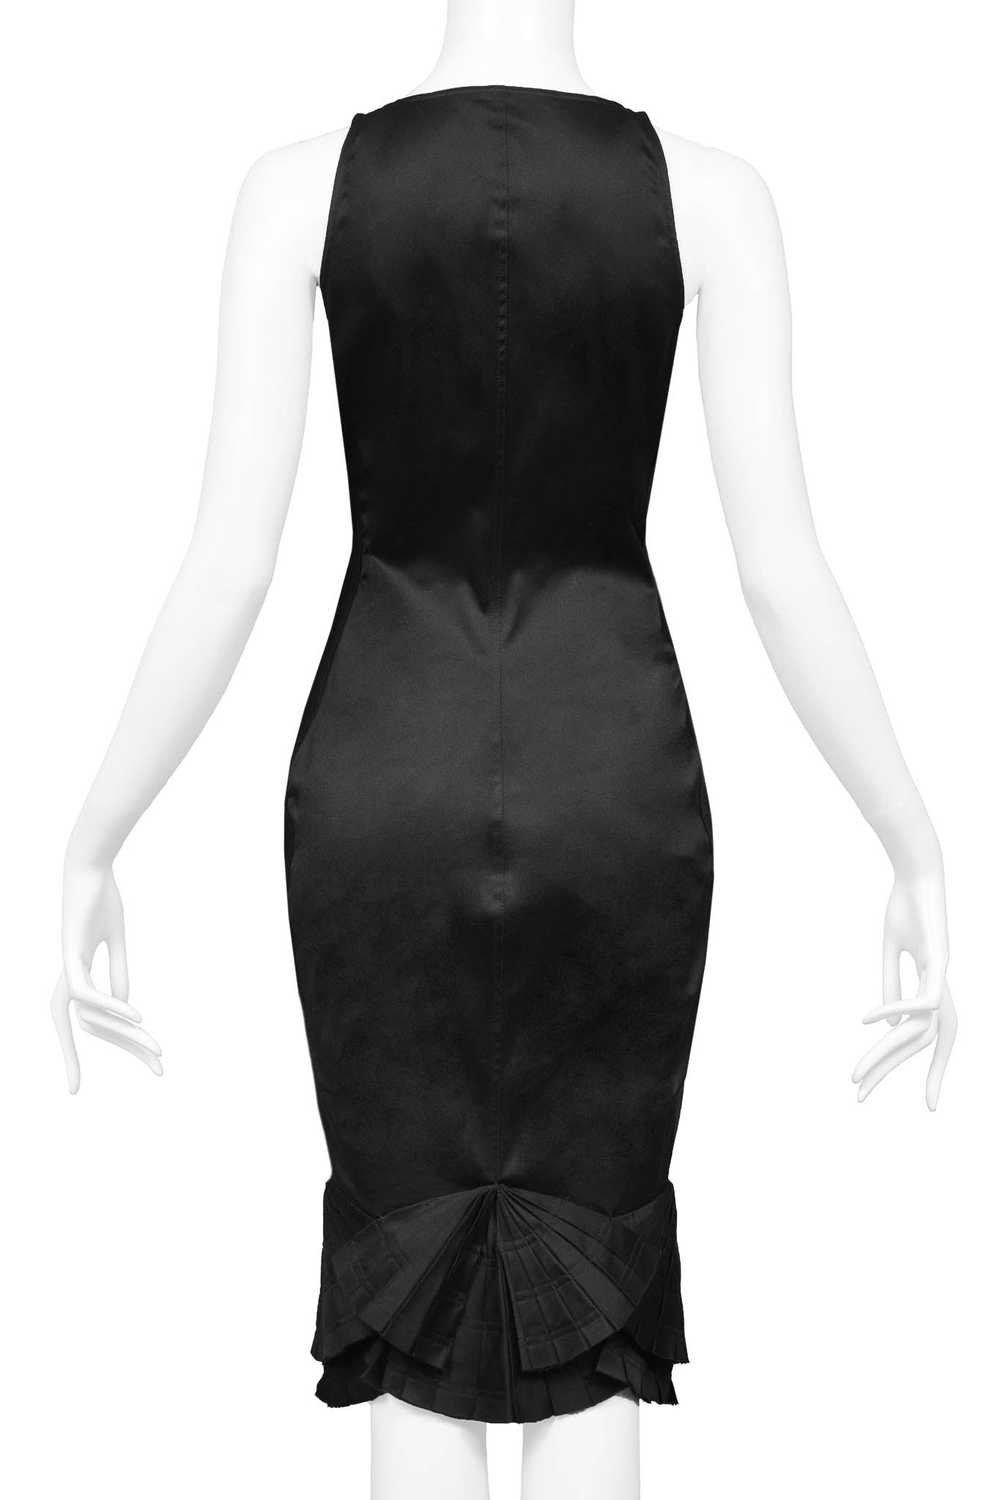 GUCCI BY TOM FORD BLACK DRESS WITH BACK PLEAT FAN… - image 5